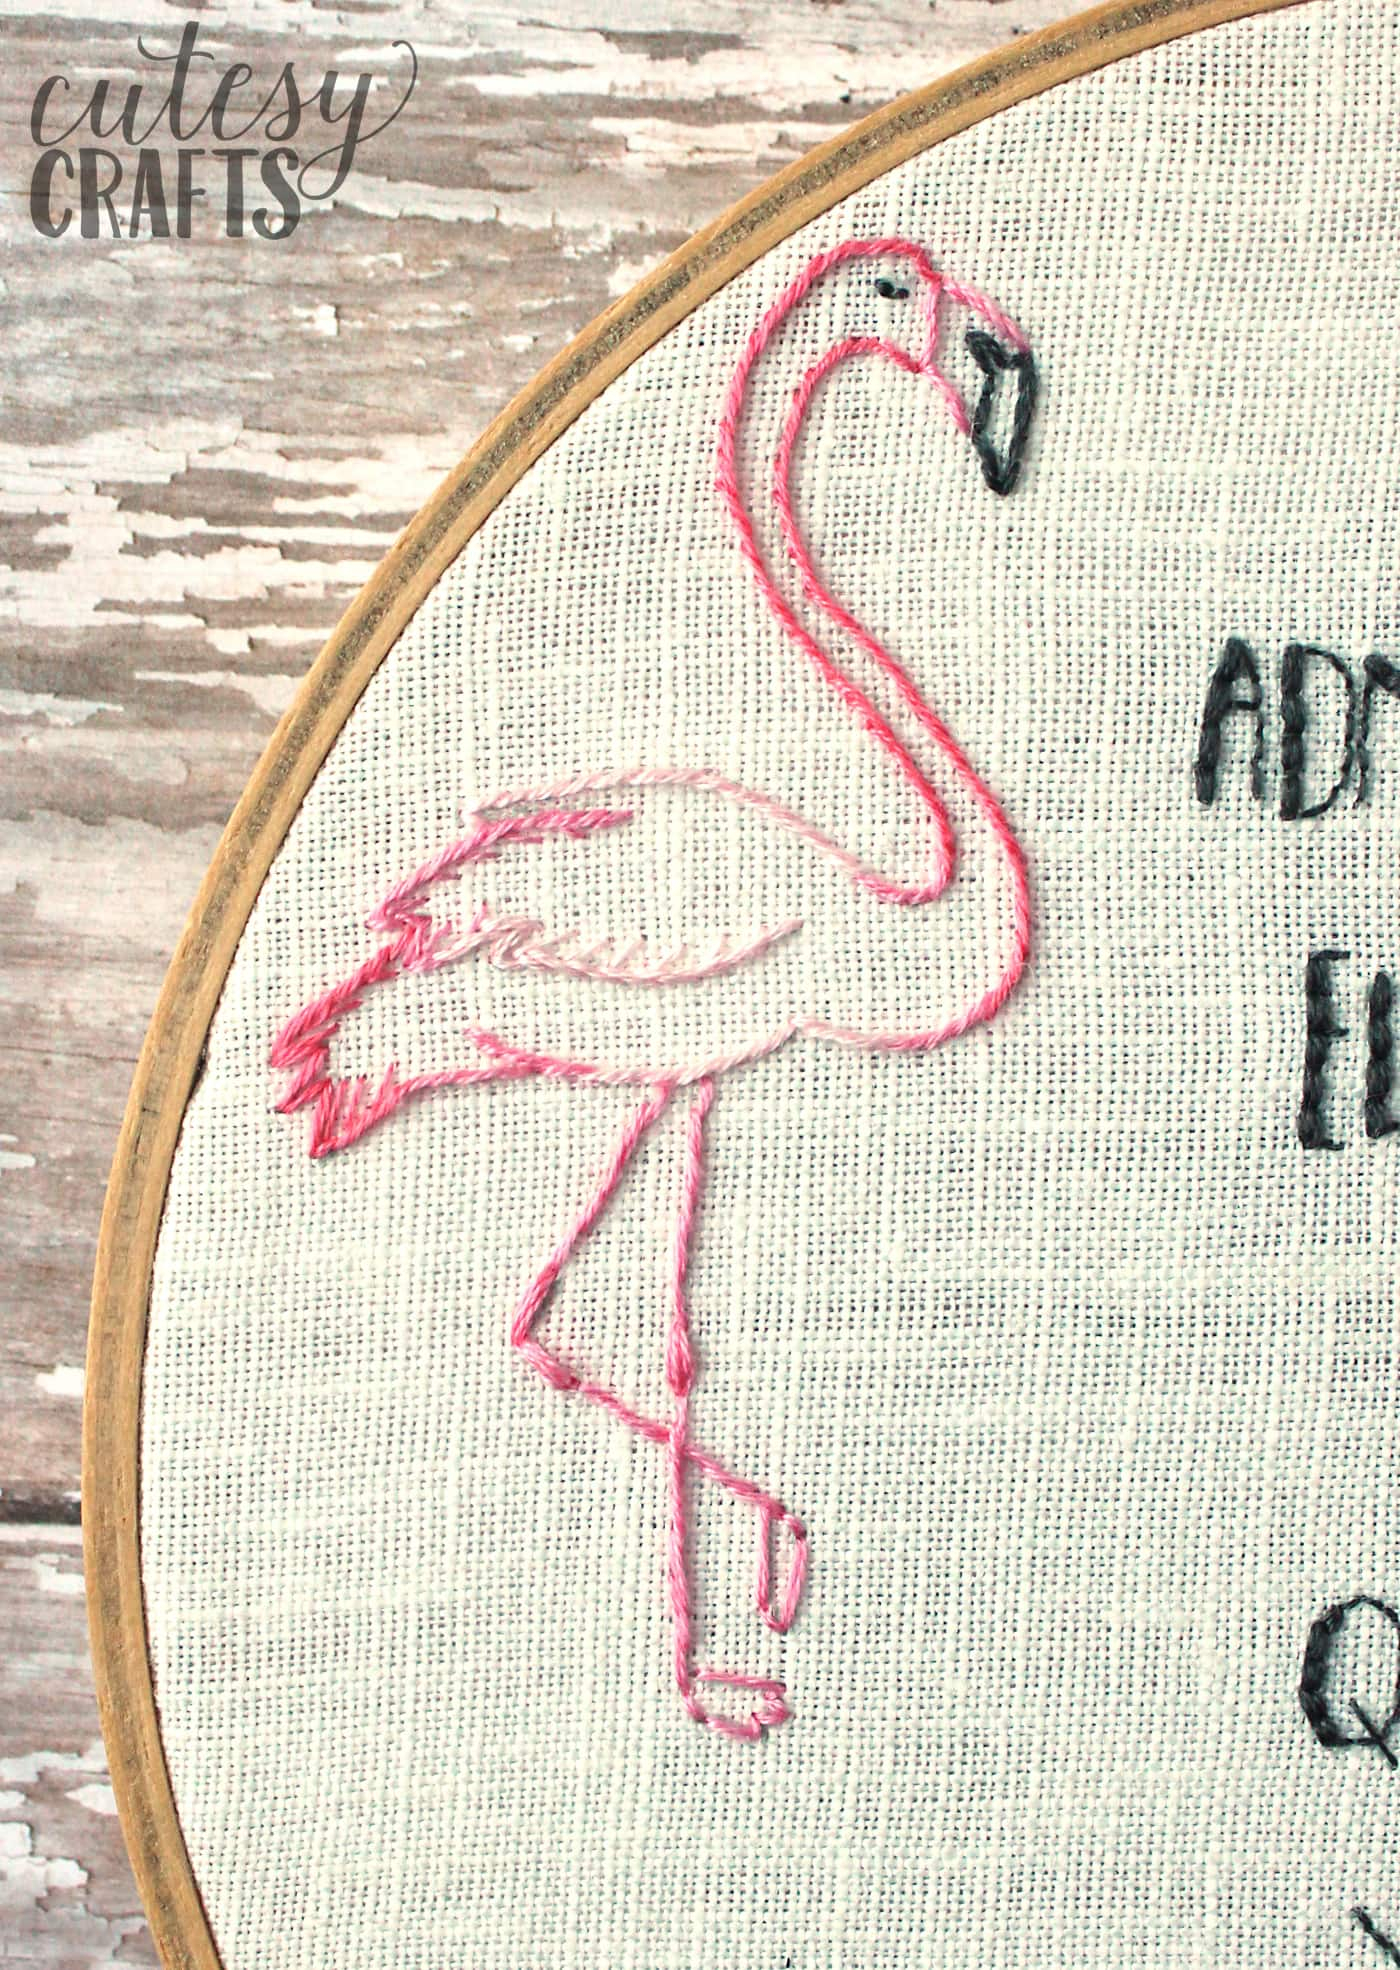 Paper Embroidery Patterns Paper Embroidery Patterns And Instructions